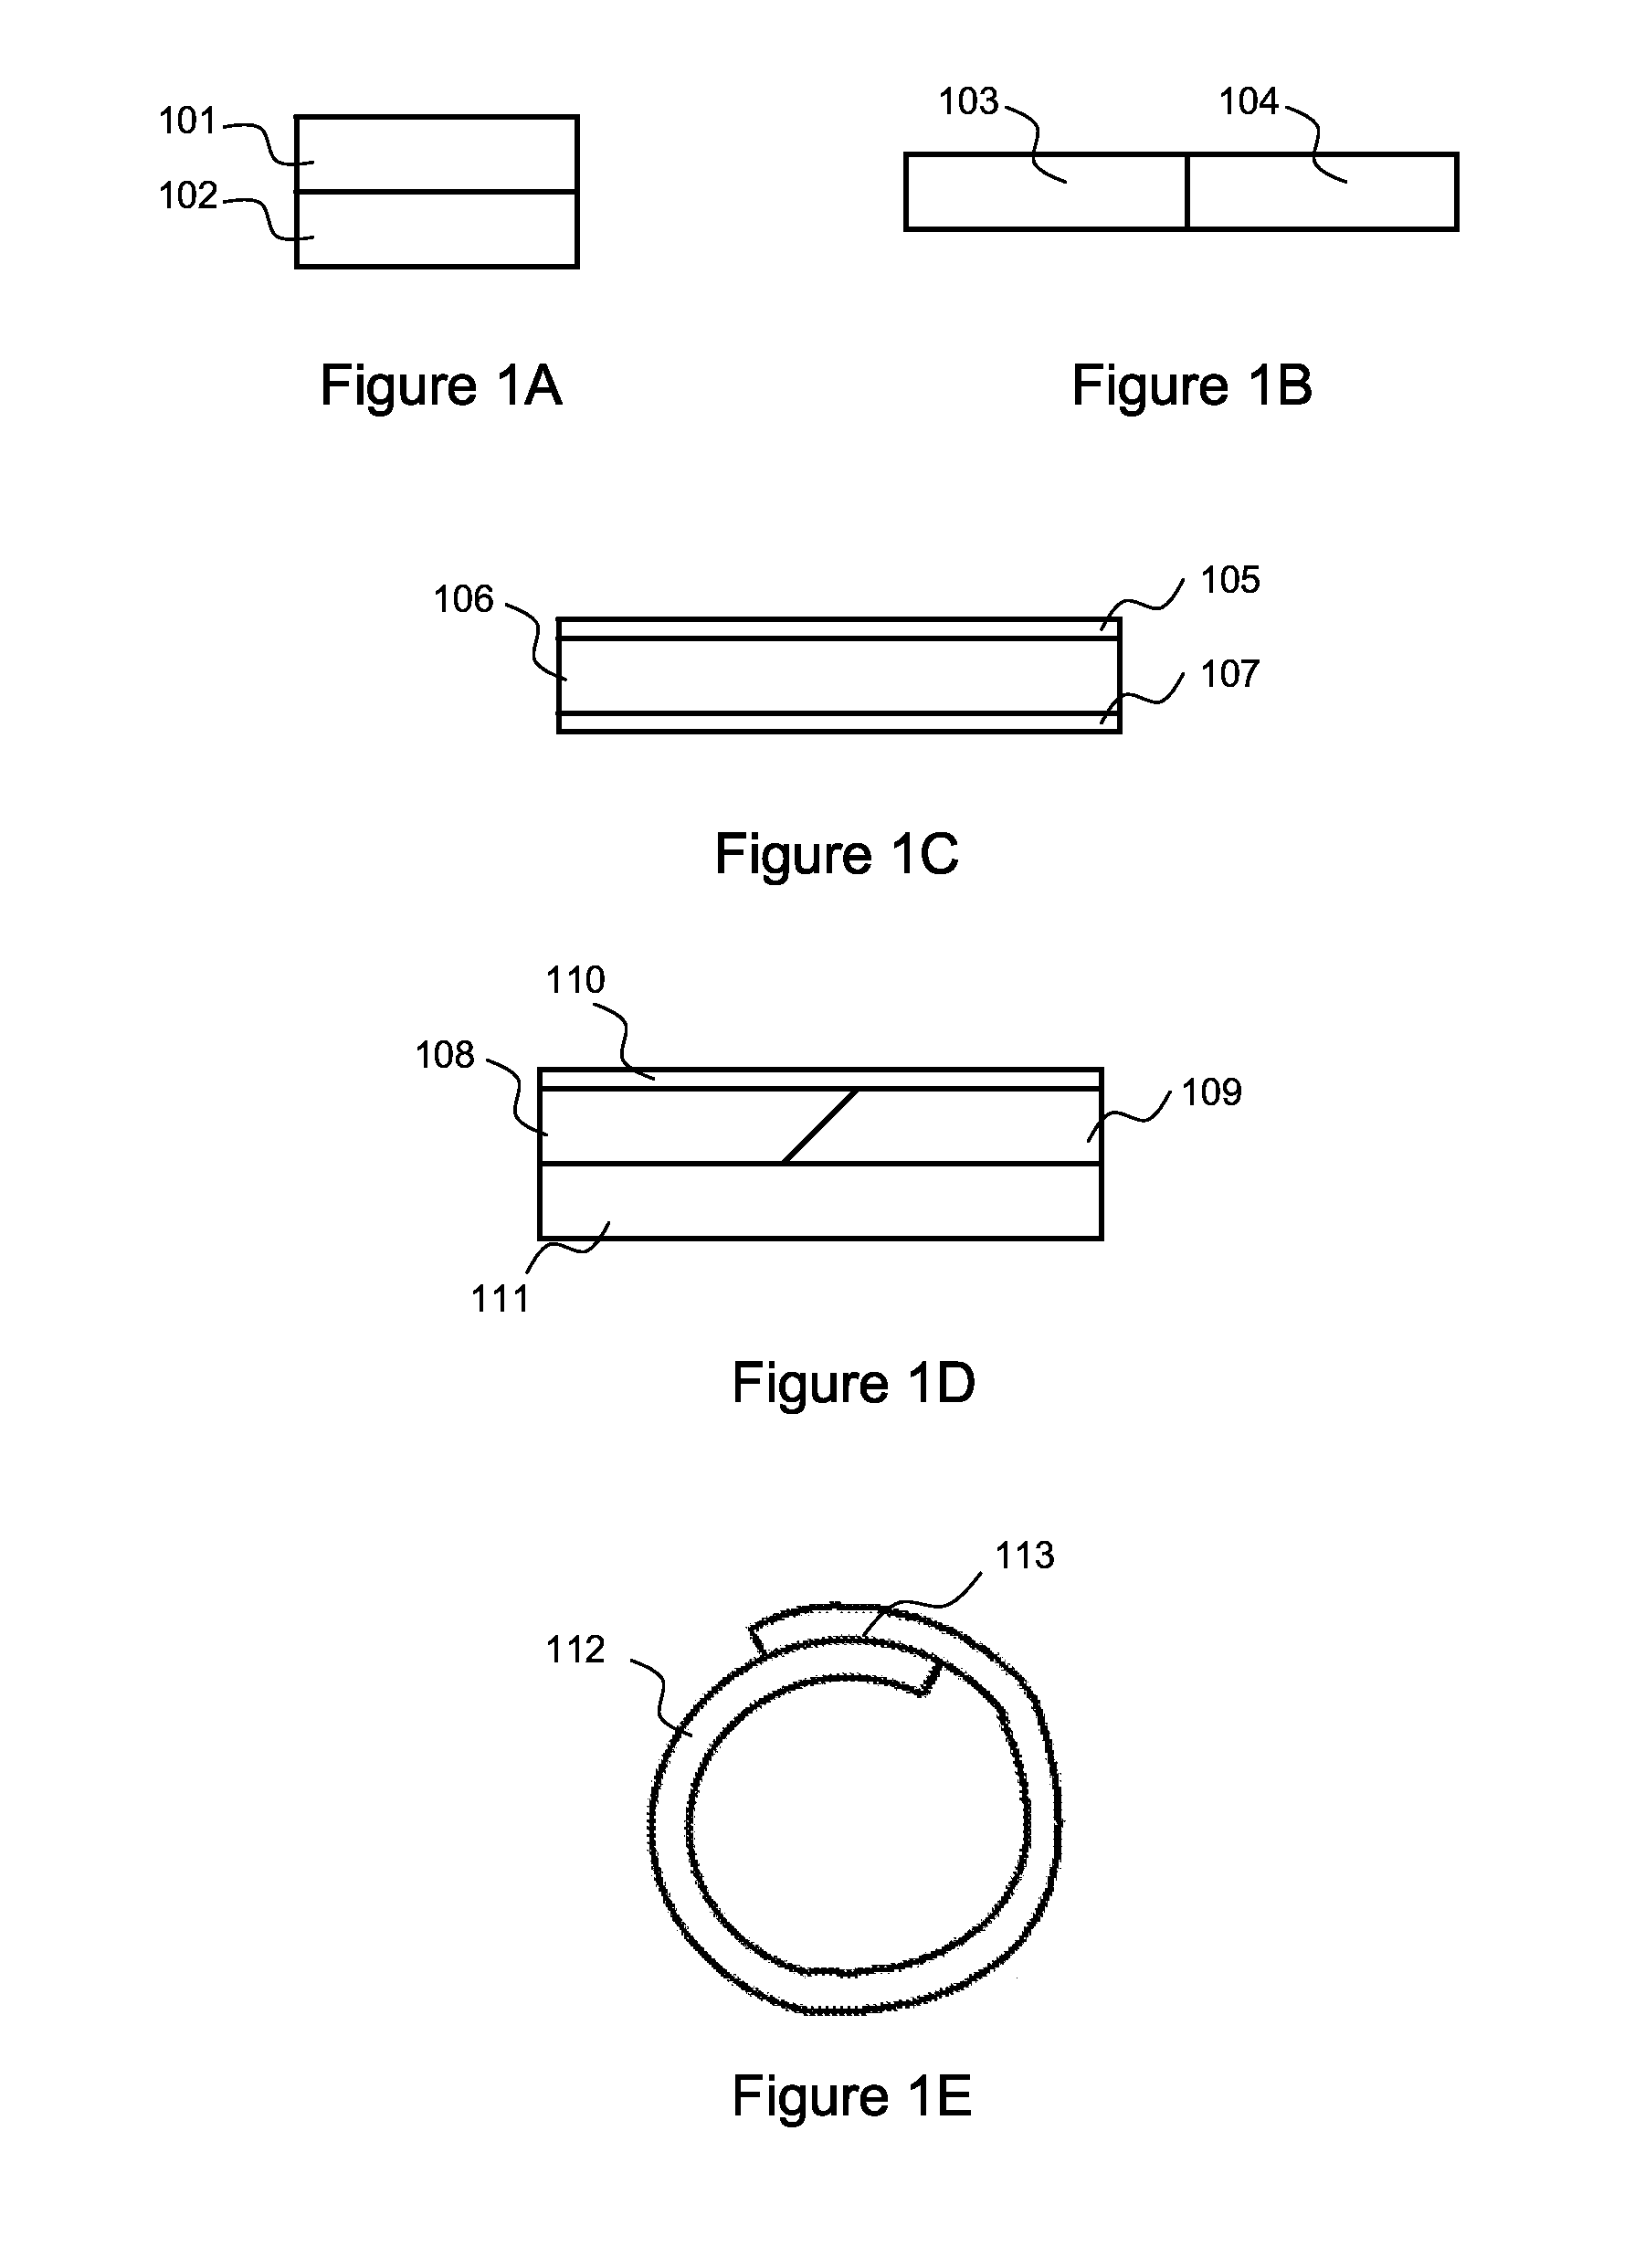 Fibrous Substrates Adhered with Substituted Cellulose Ester Adhesives and Methods Relating Thereto